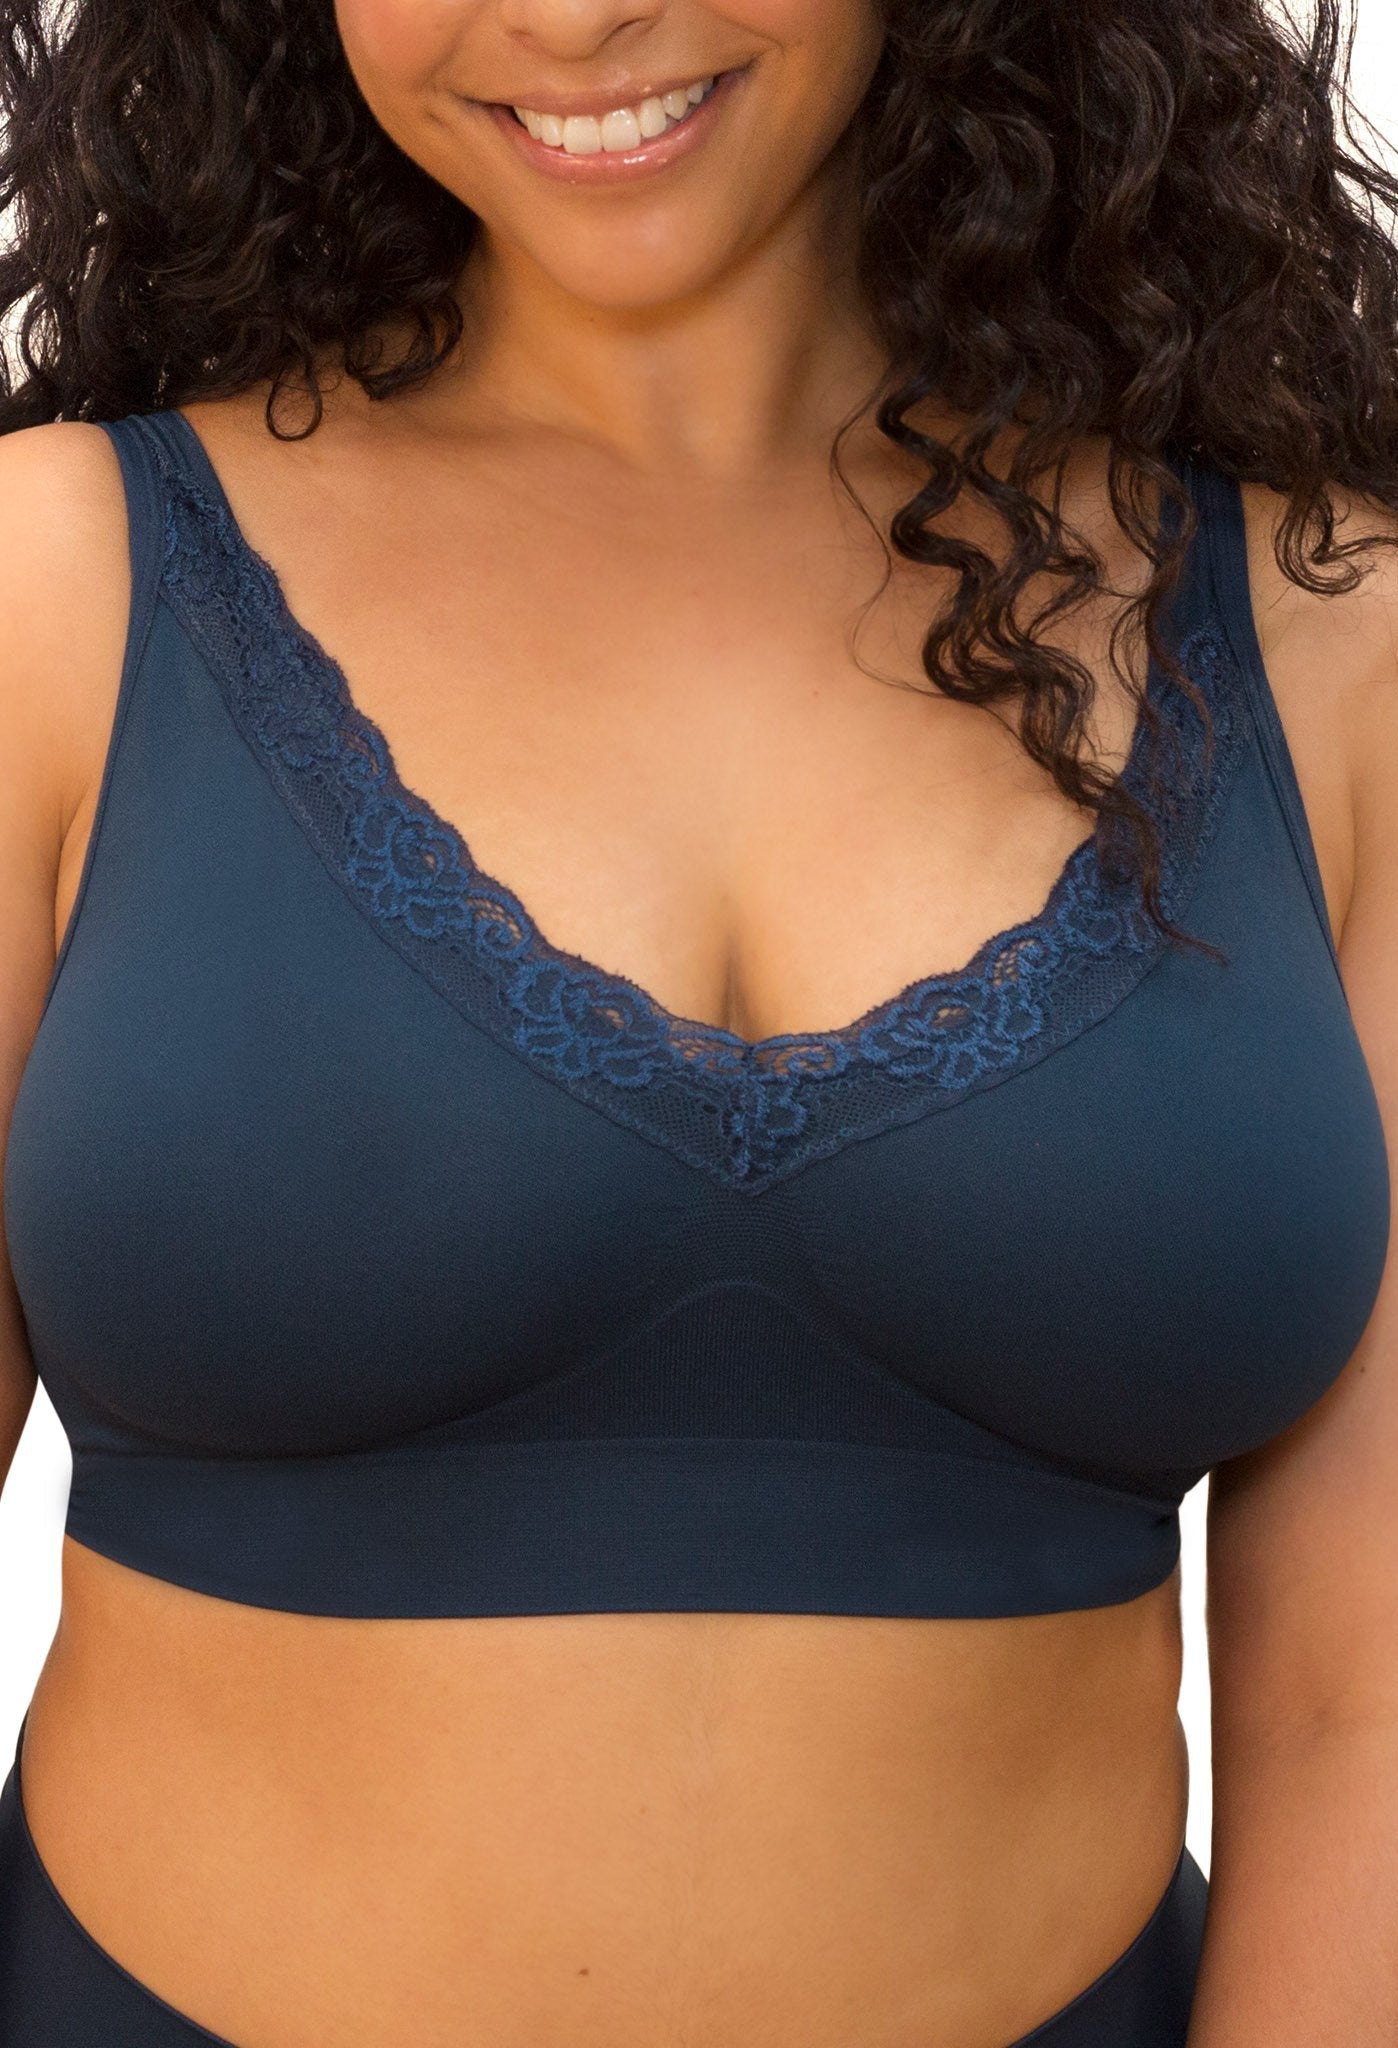 UpLady 8532 | Extra Firm High Compression Full Cup Push Up Bra